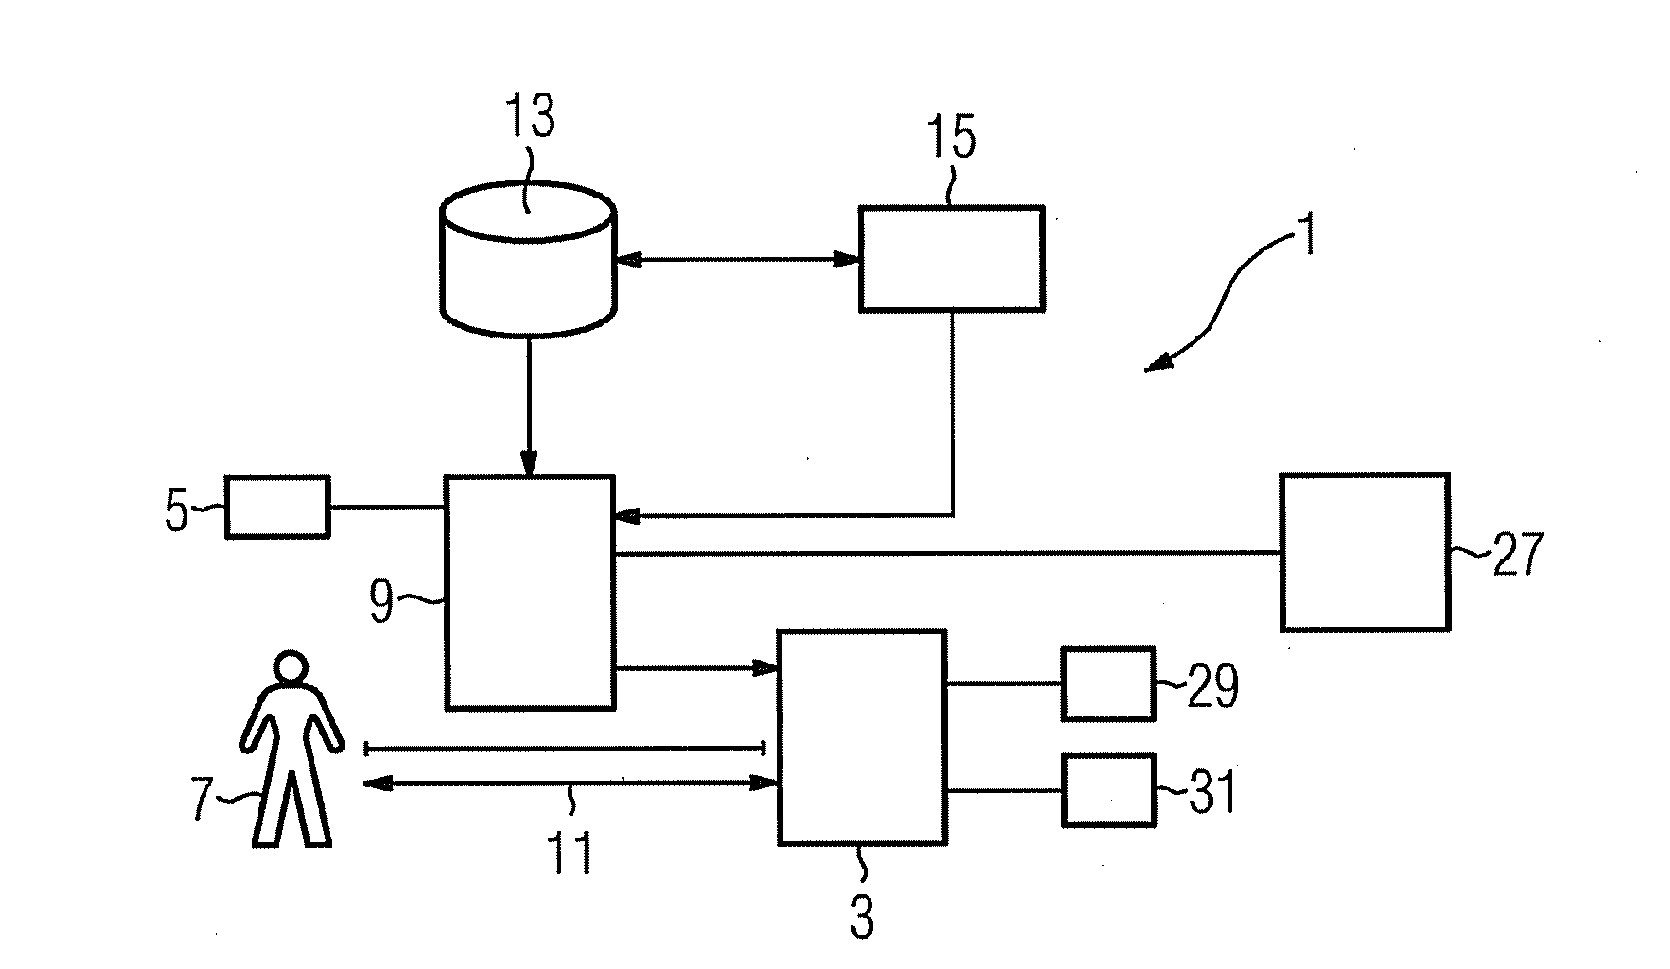 Display device for displaying a system state